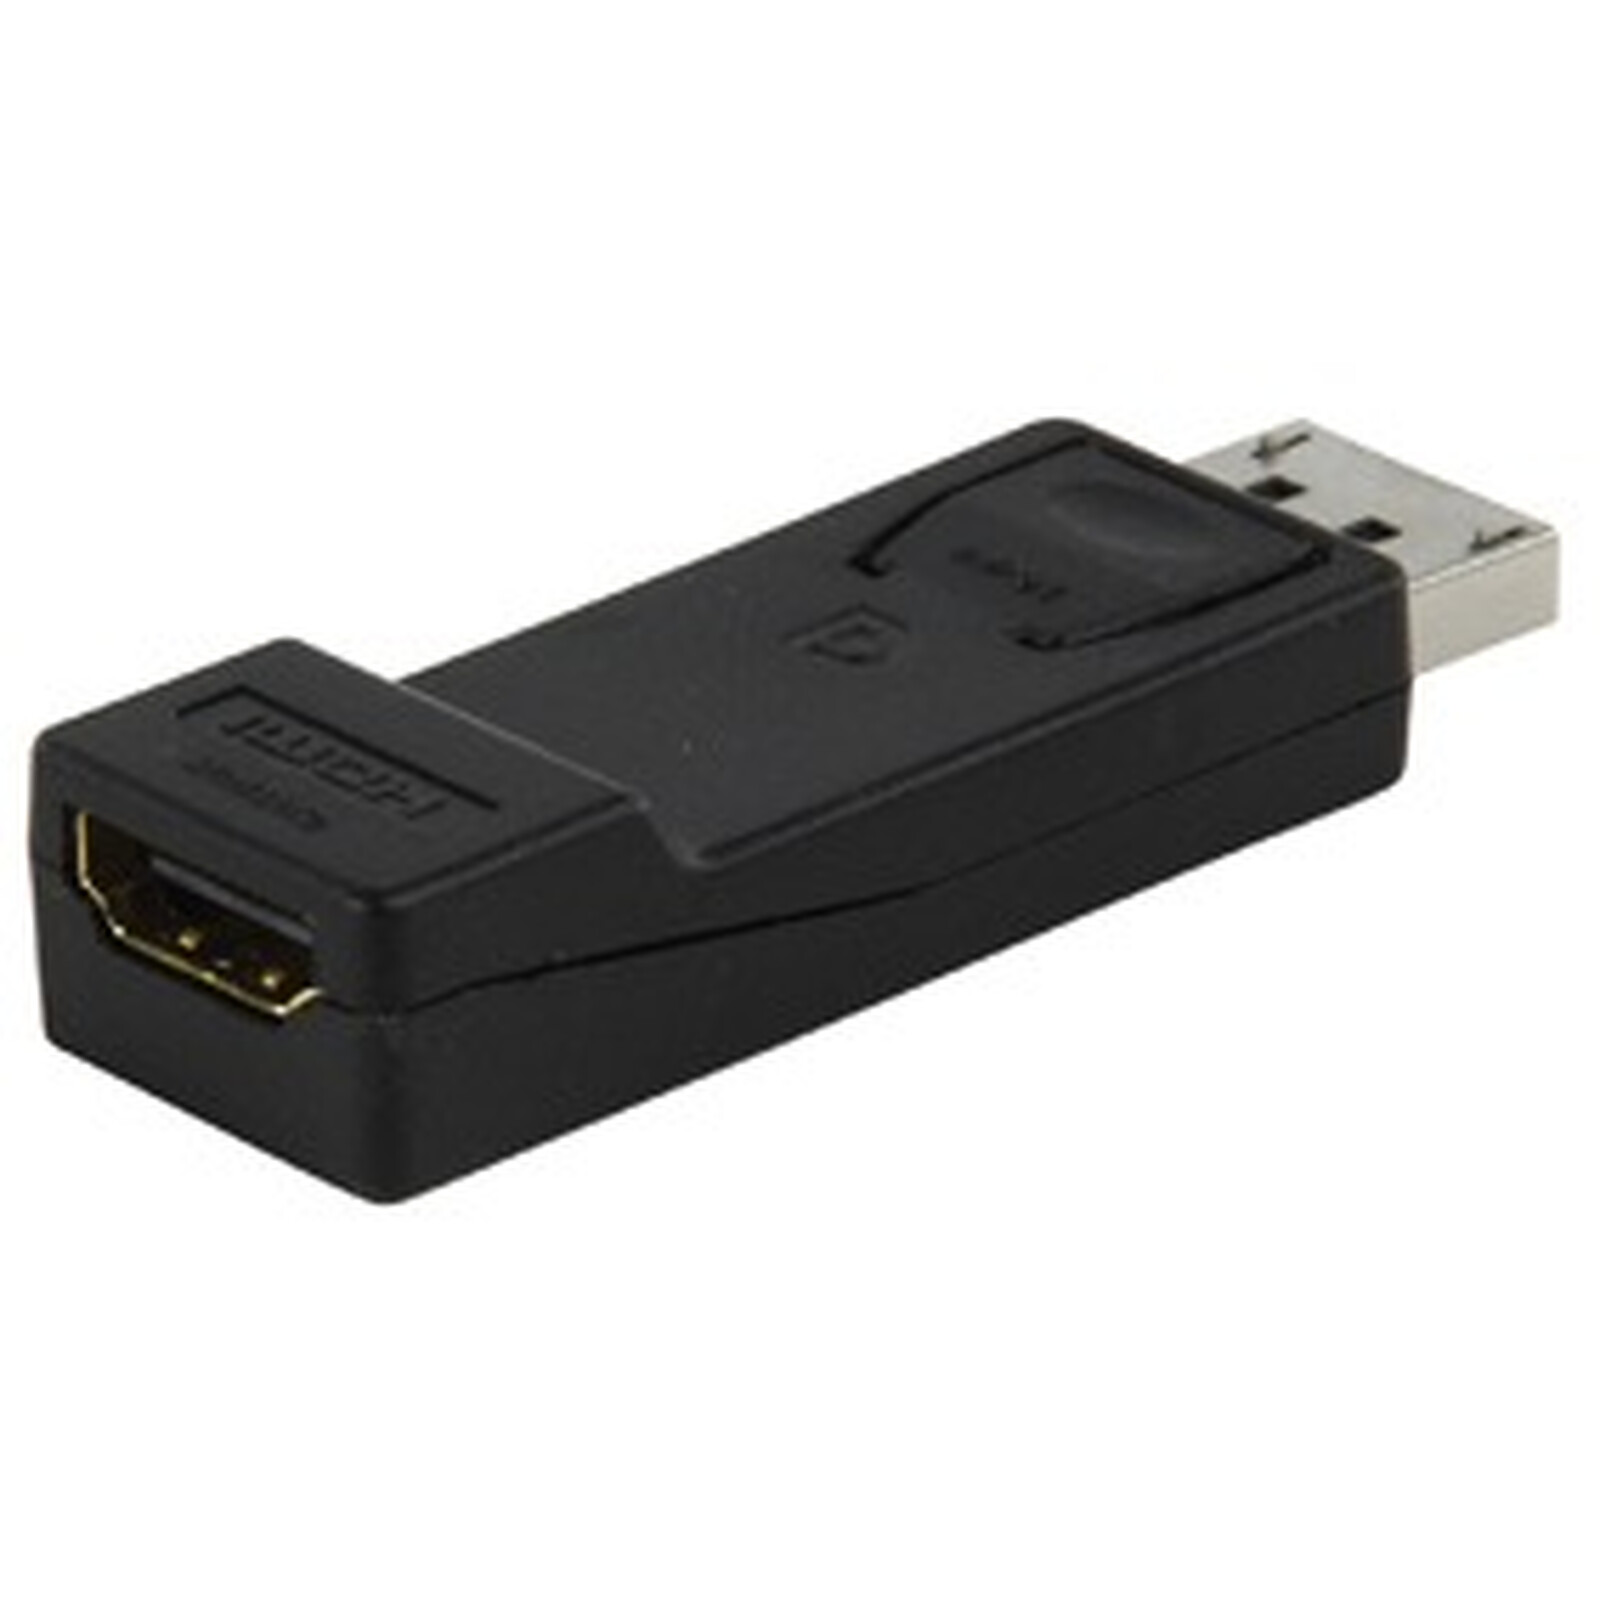 DisplayPort male to HDMI female adapter - Generic on LDLC